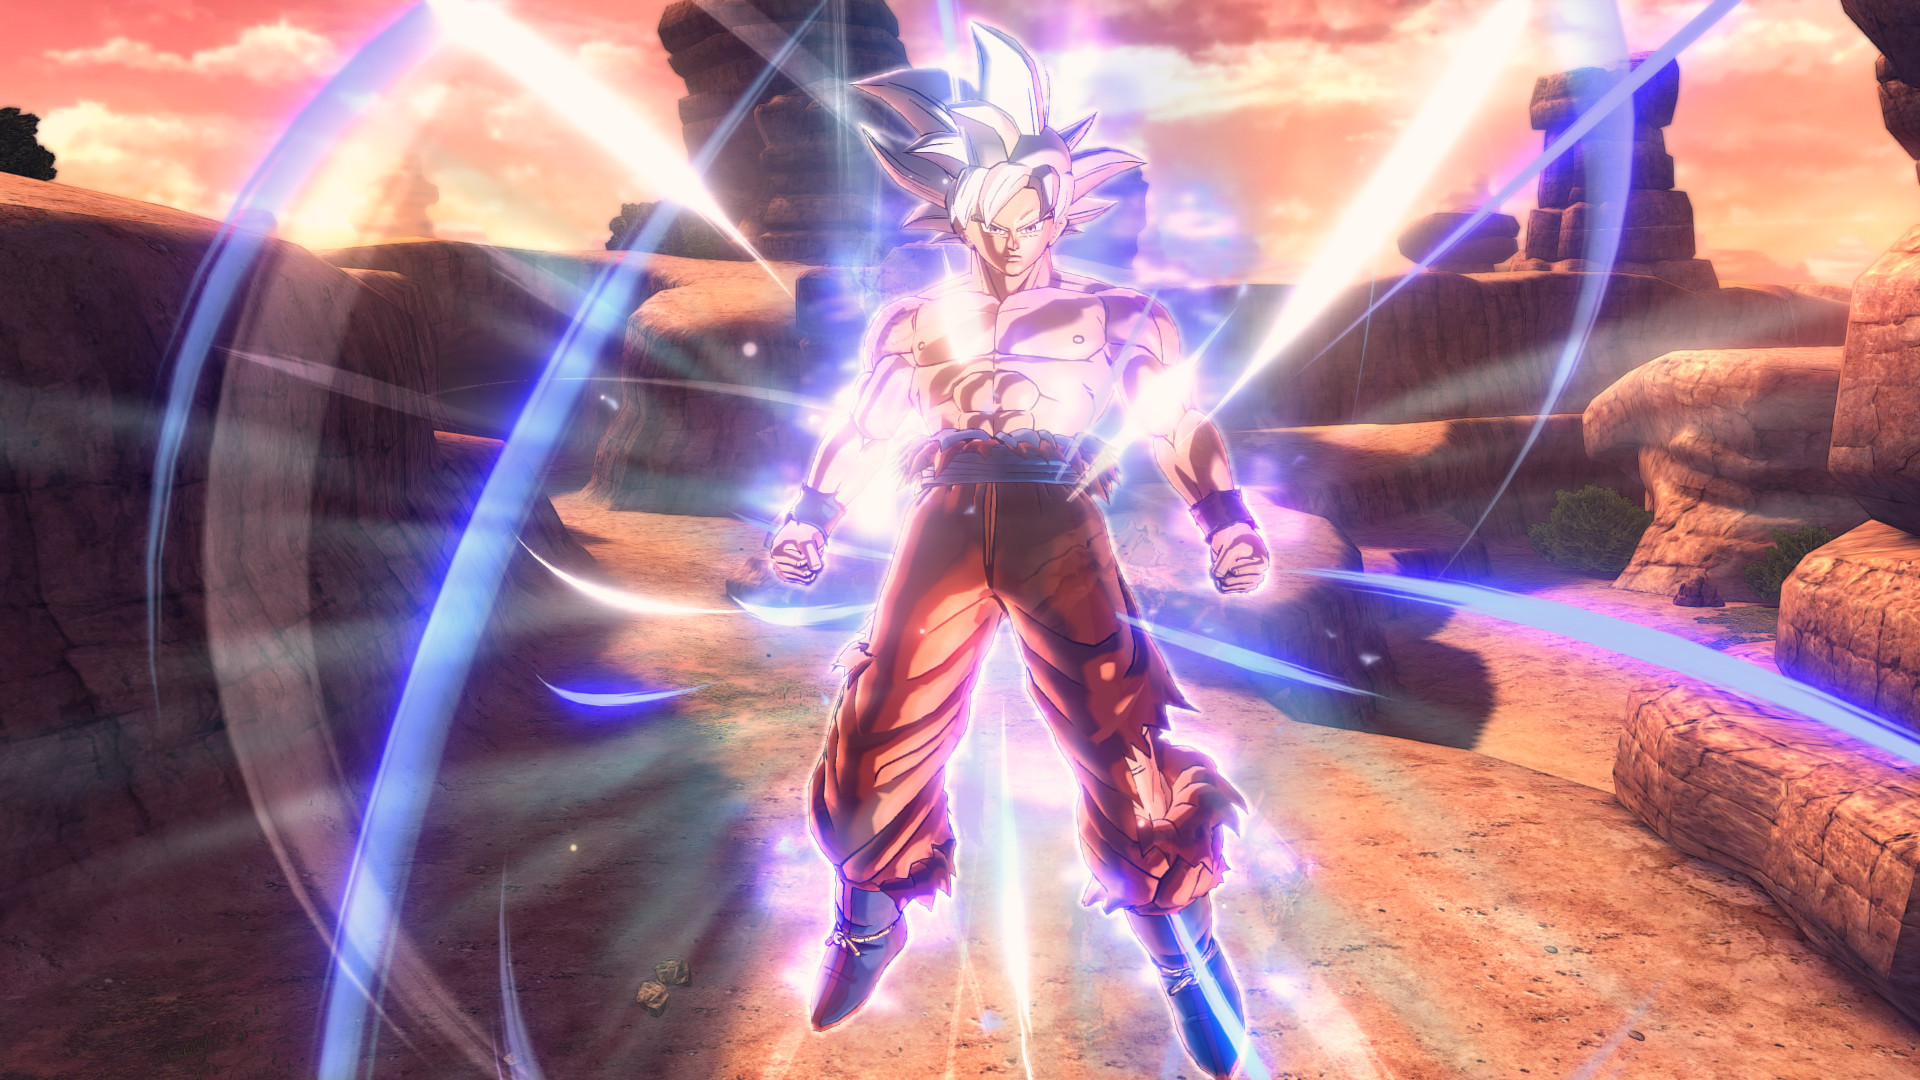 DRAGON BALL XENOVERSE 2 - Extra DLC Pack 4 on Steam